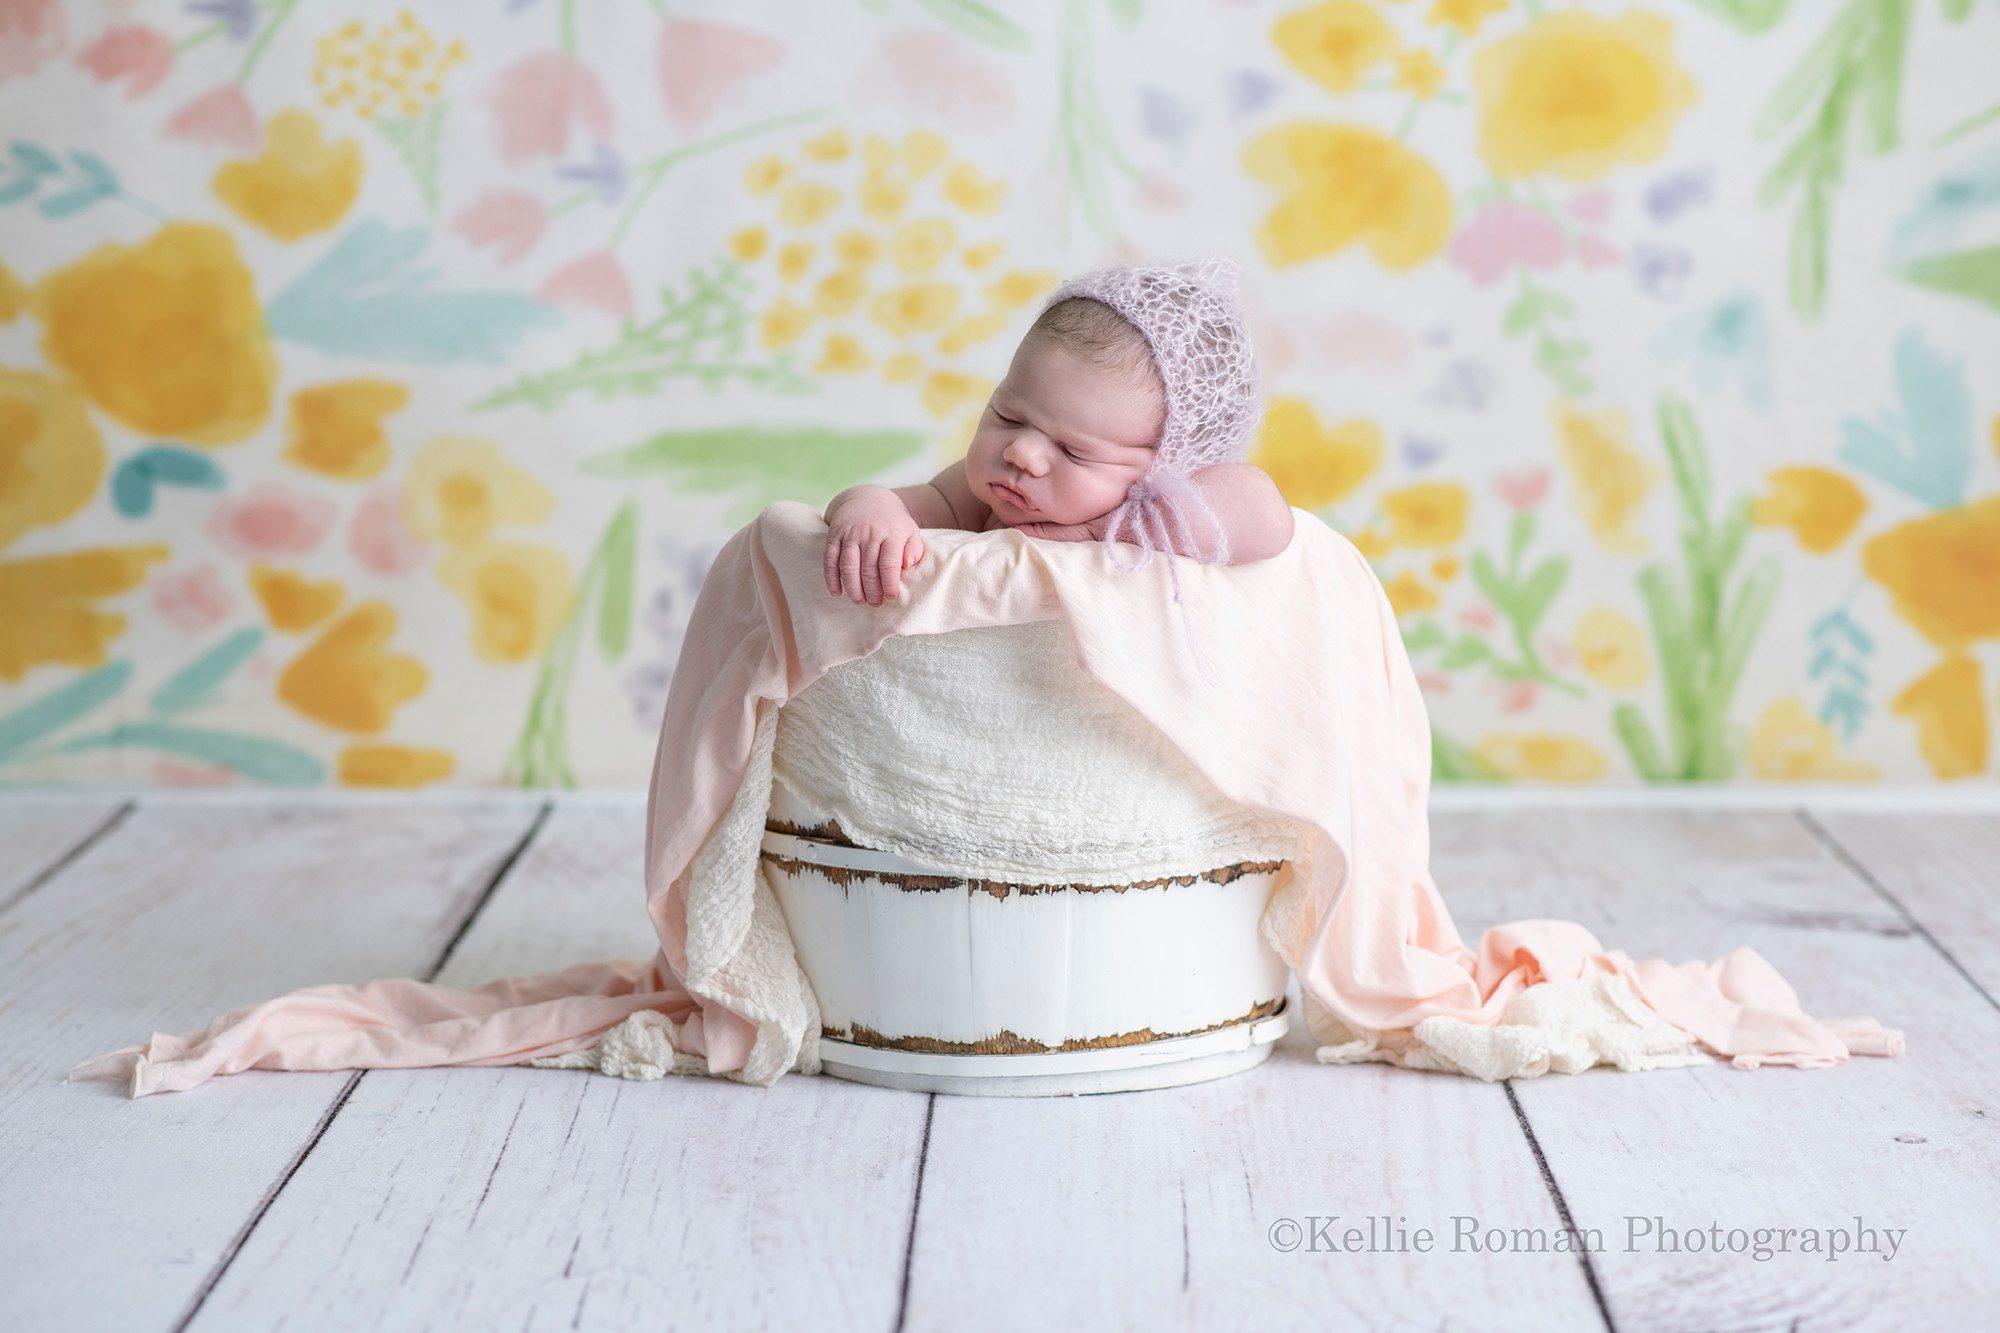 baby photos a newborn infant girl in a milwaukee Wisconsin photographer studio she is posed upright in a white wood bucket the bucket is onto of a white wood floor and in front of a floral backdrop with shades of yellow pink purple and blues. The newborn is resting her chin on one of her arms and the other arm is over the edge of the bucket she is wearing a pink bonnet